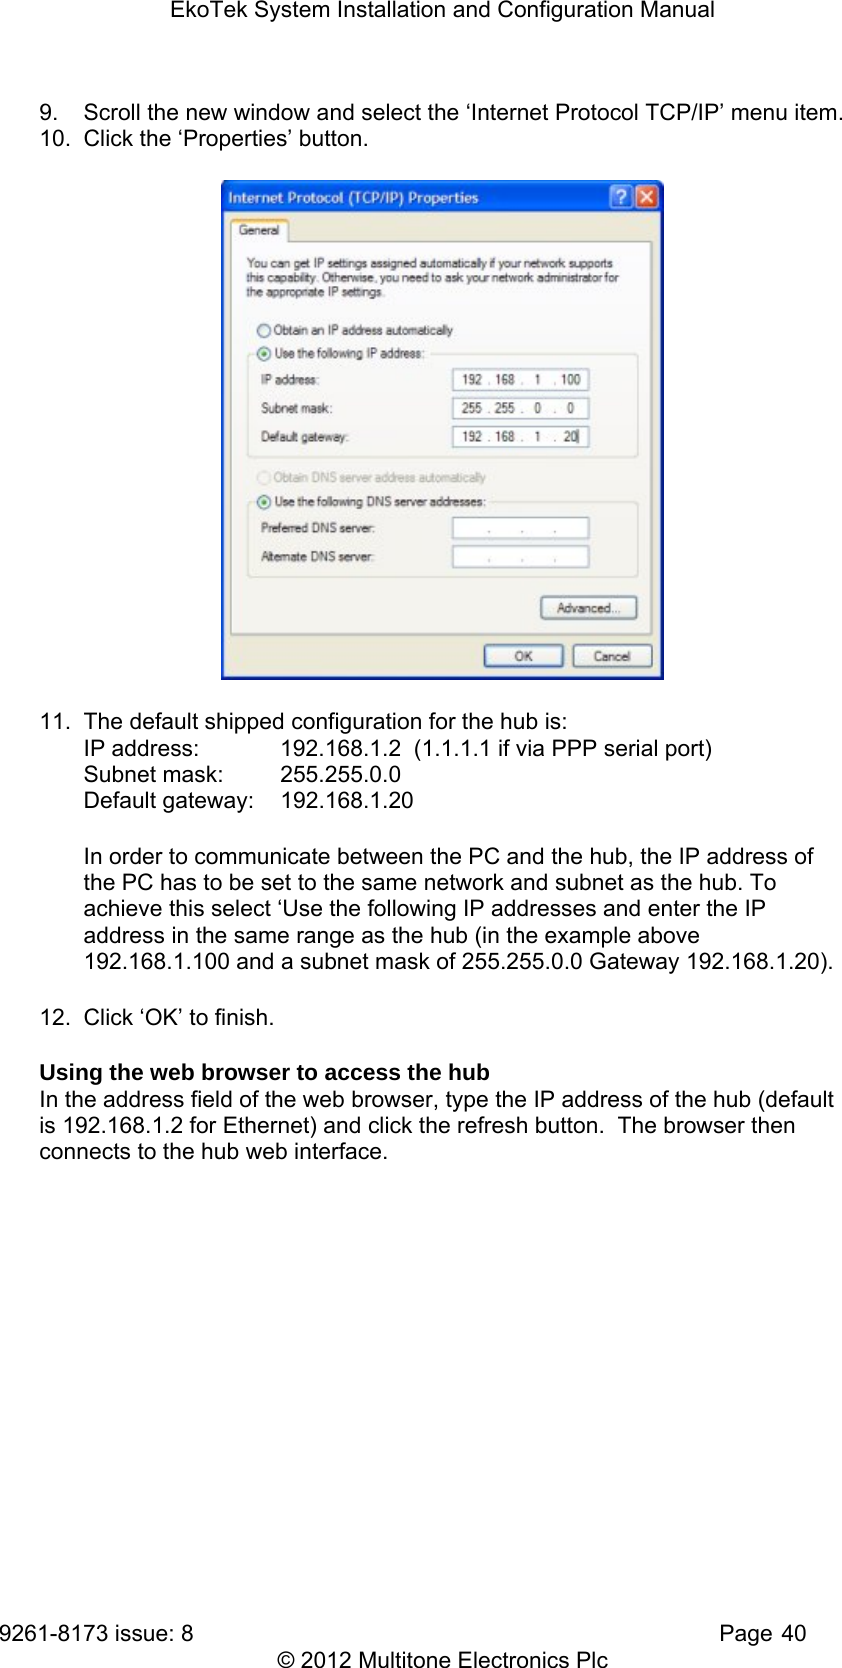 EkoTek System Installation and Configuration Manual 9261-8173 issue: 8   Page 40 © 2012 Multitone Electronics Plc 9.  Scroll the new window and select the ‘Internet Protocol TCP/IP’ menu item. 10.  Click the ‘Properties’ button.  11.  The default shipped configuration for the hub is: IP address:   192.168.1.2  (1.1.1.1 if via PPP serial port) Subnet mask:   255.255.0.0  Default gateway:   192.168.1.20 In order to communicate between the PC and the hub, the IP address of the PC has to be set to the same network and subnet as the hub. To achieve this select ‘Use the following IP addresses and enter the IP address in the same range as the hub (in the example above 192.168.1.100 and a subnet mask of 255.255.0.0 Gateway 192.168.1.20). 12.  Click ‘OK’ to finish. Using the web browser to access the hub In the address field of the web browser, type the IP address of the hub (default is 192.168.1.2 for Ethernet) and click the refresh button.  The browser then connects to the hub web interface. 